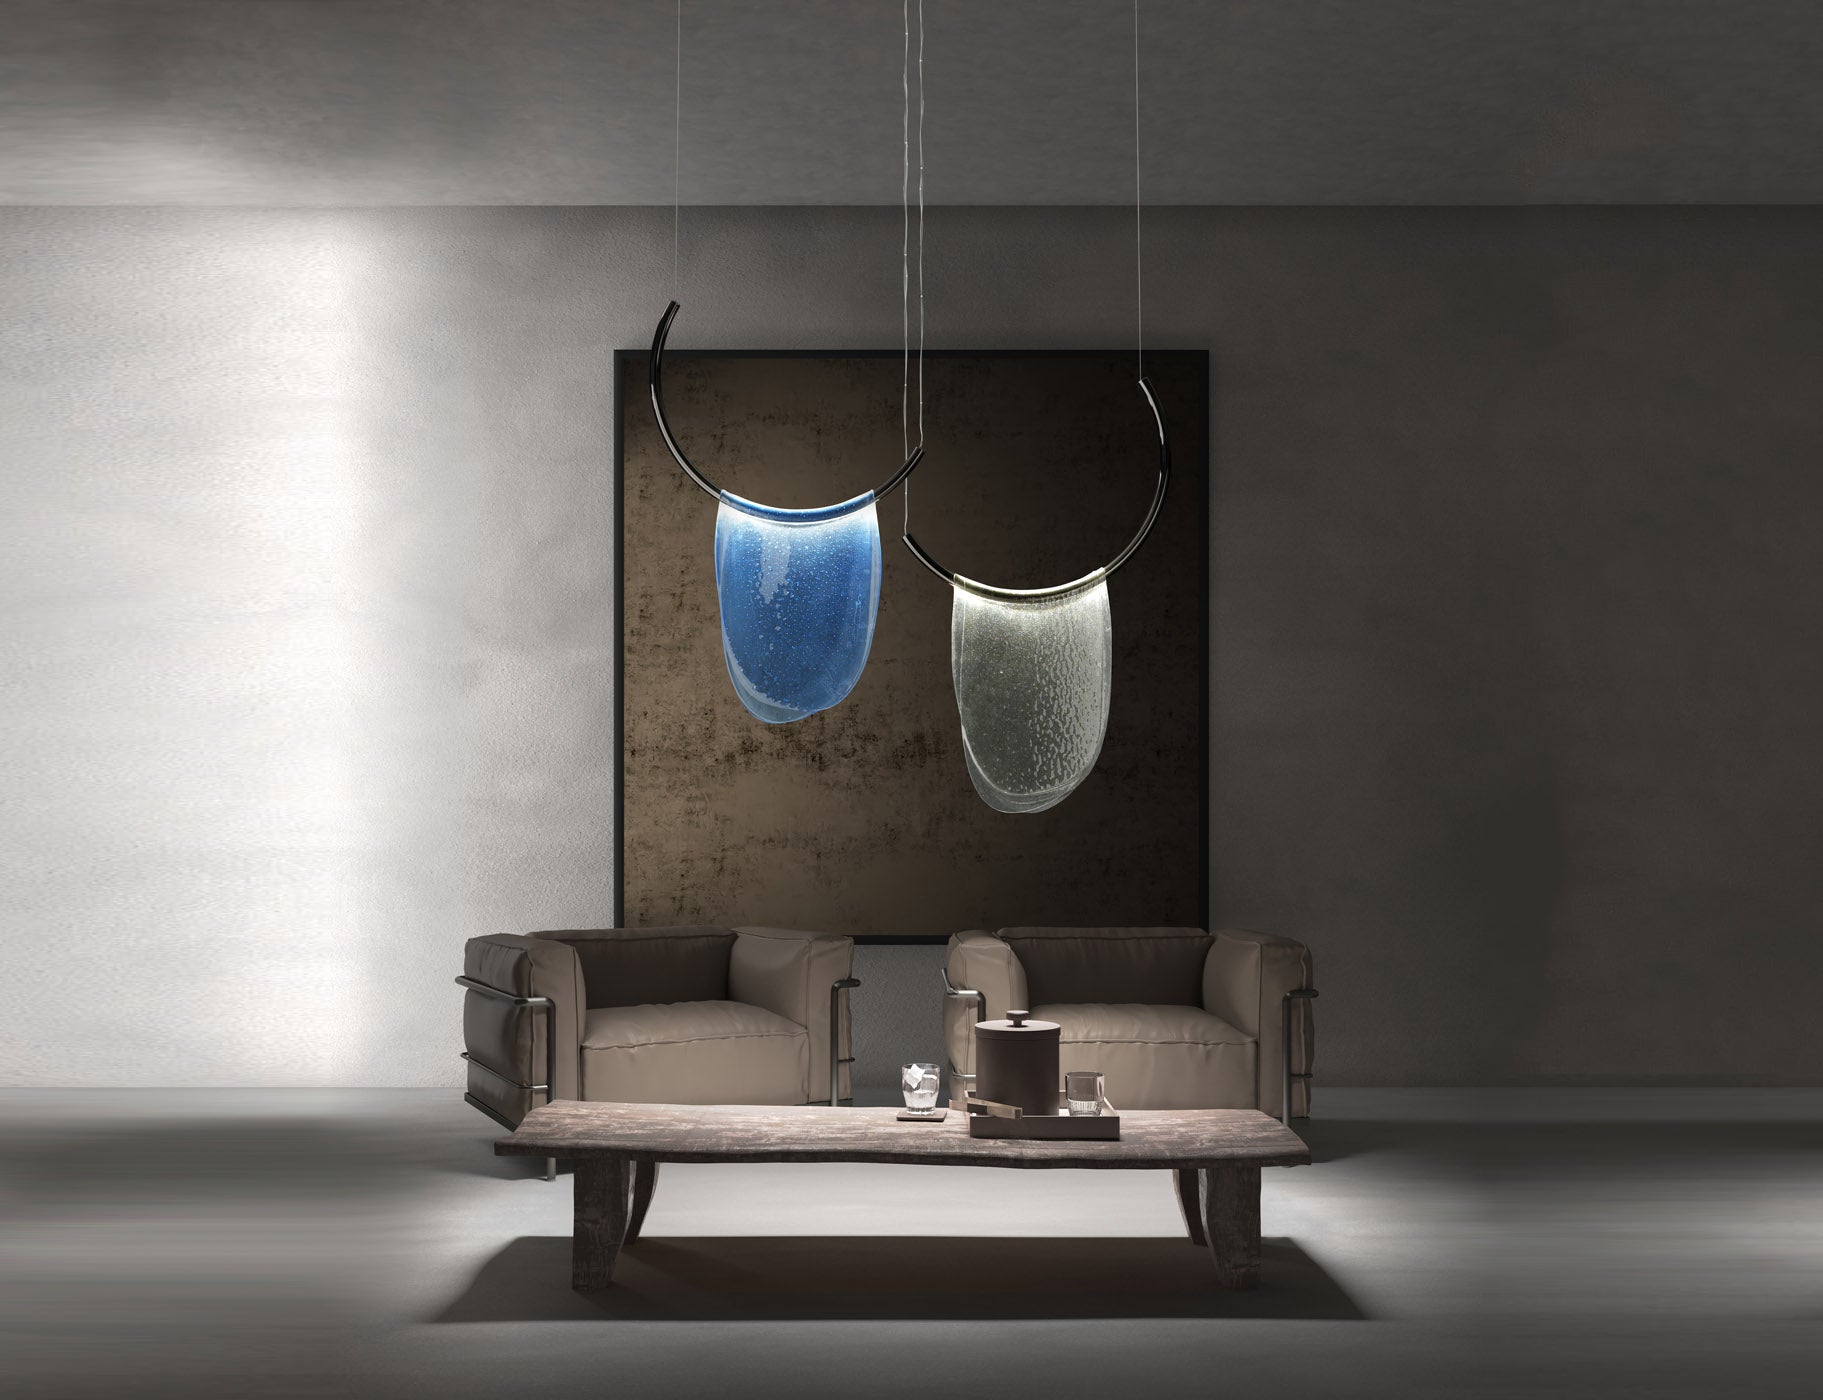 Italamp, Made in Italy, Decorative Lighting Collection available at Spacio India